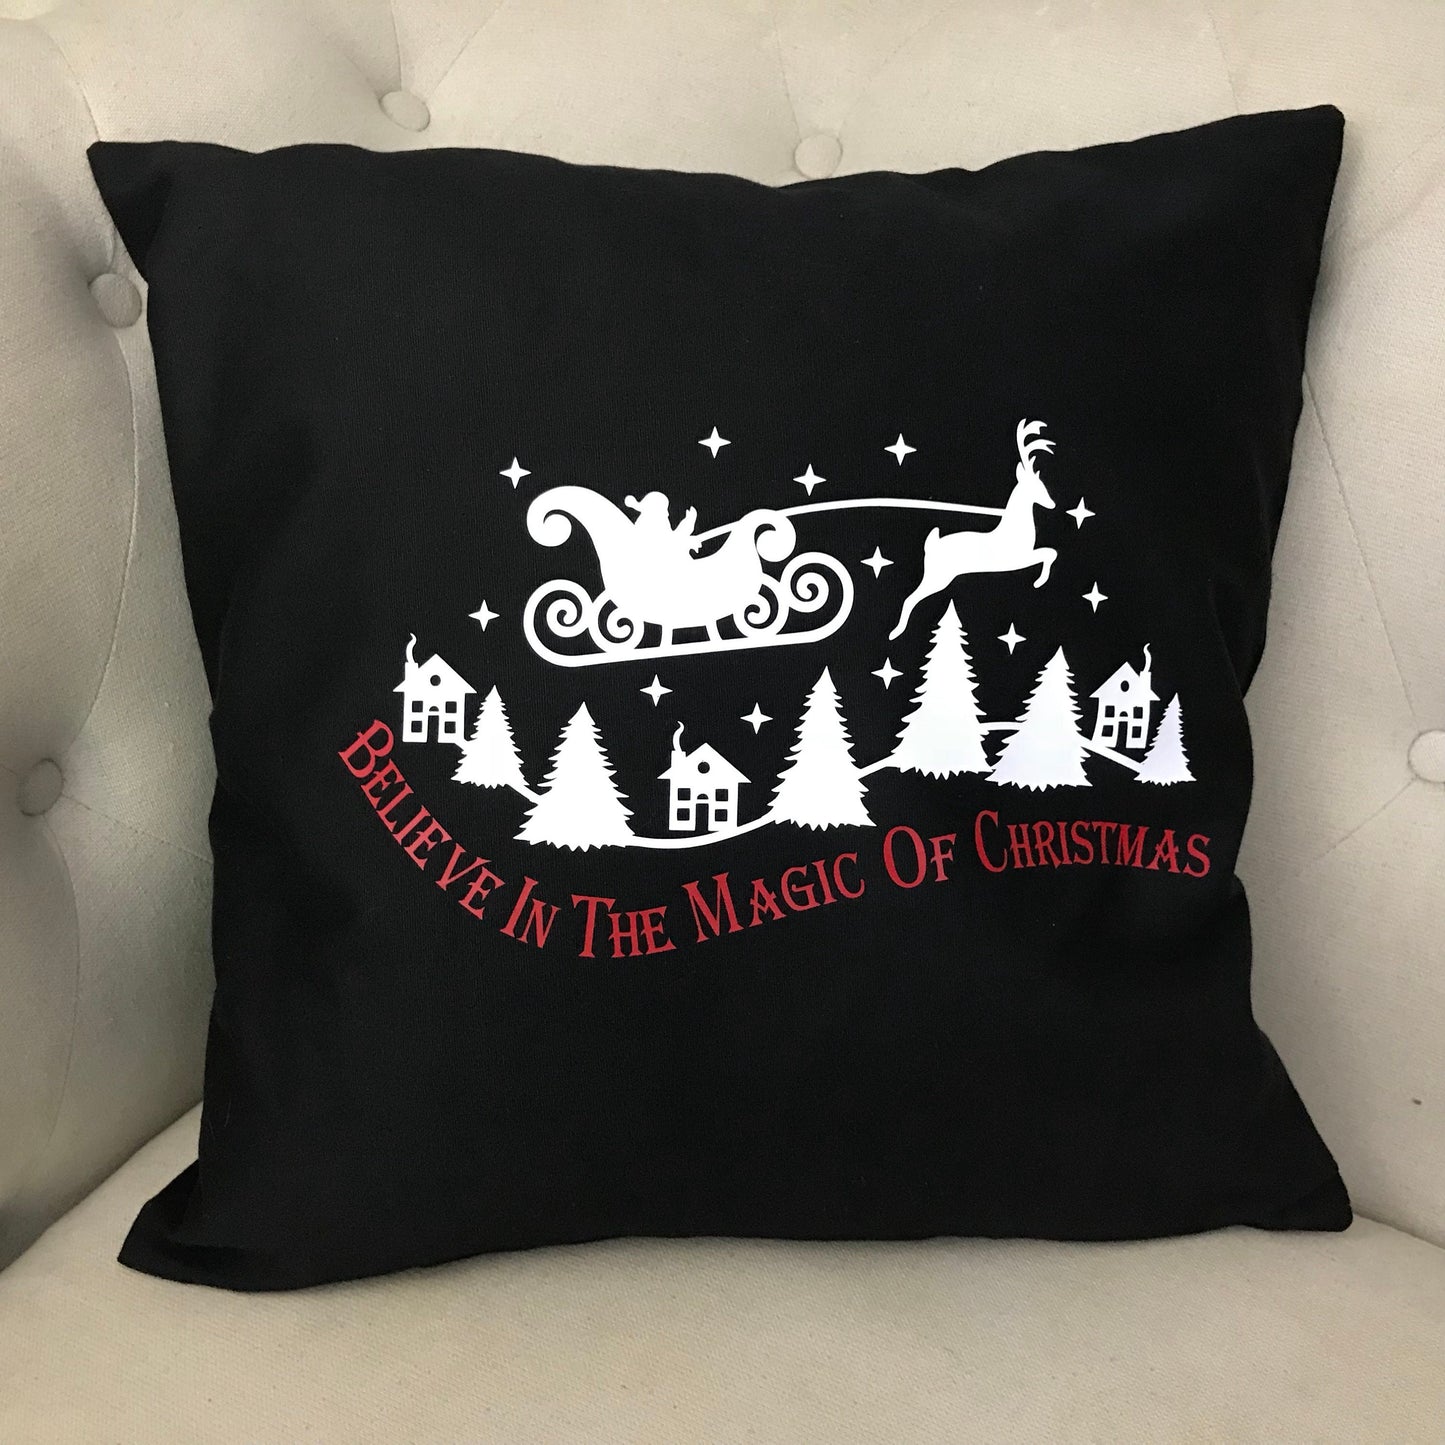 Believe in the Magic of Christmas Throw Pillow